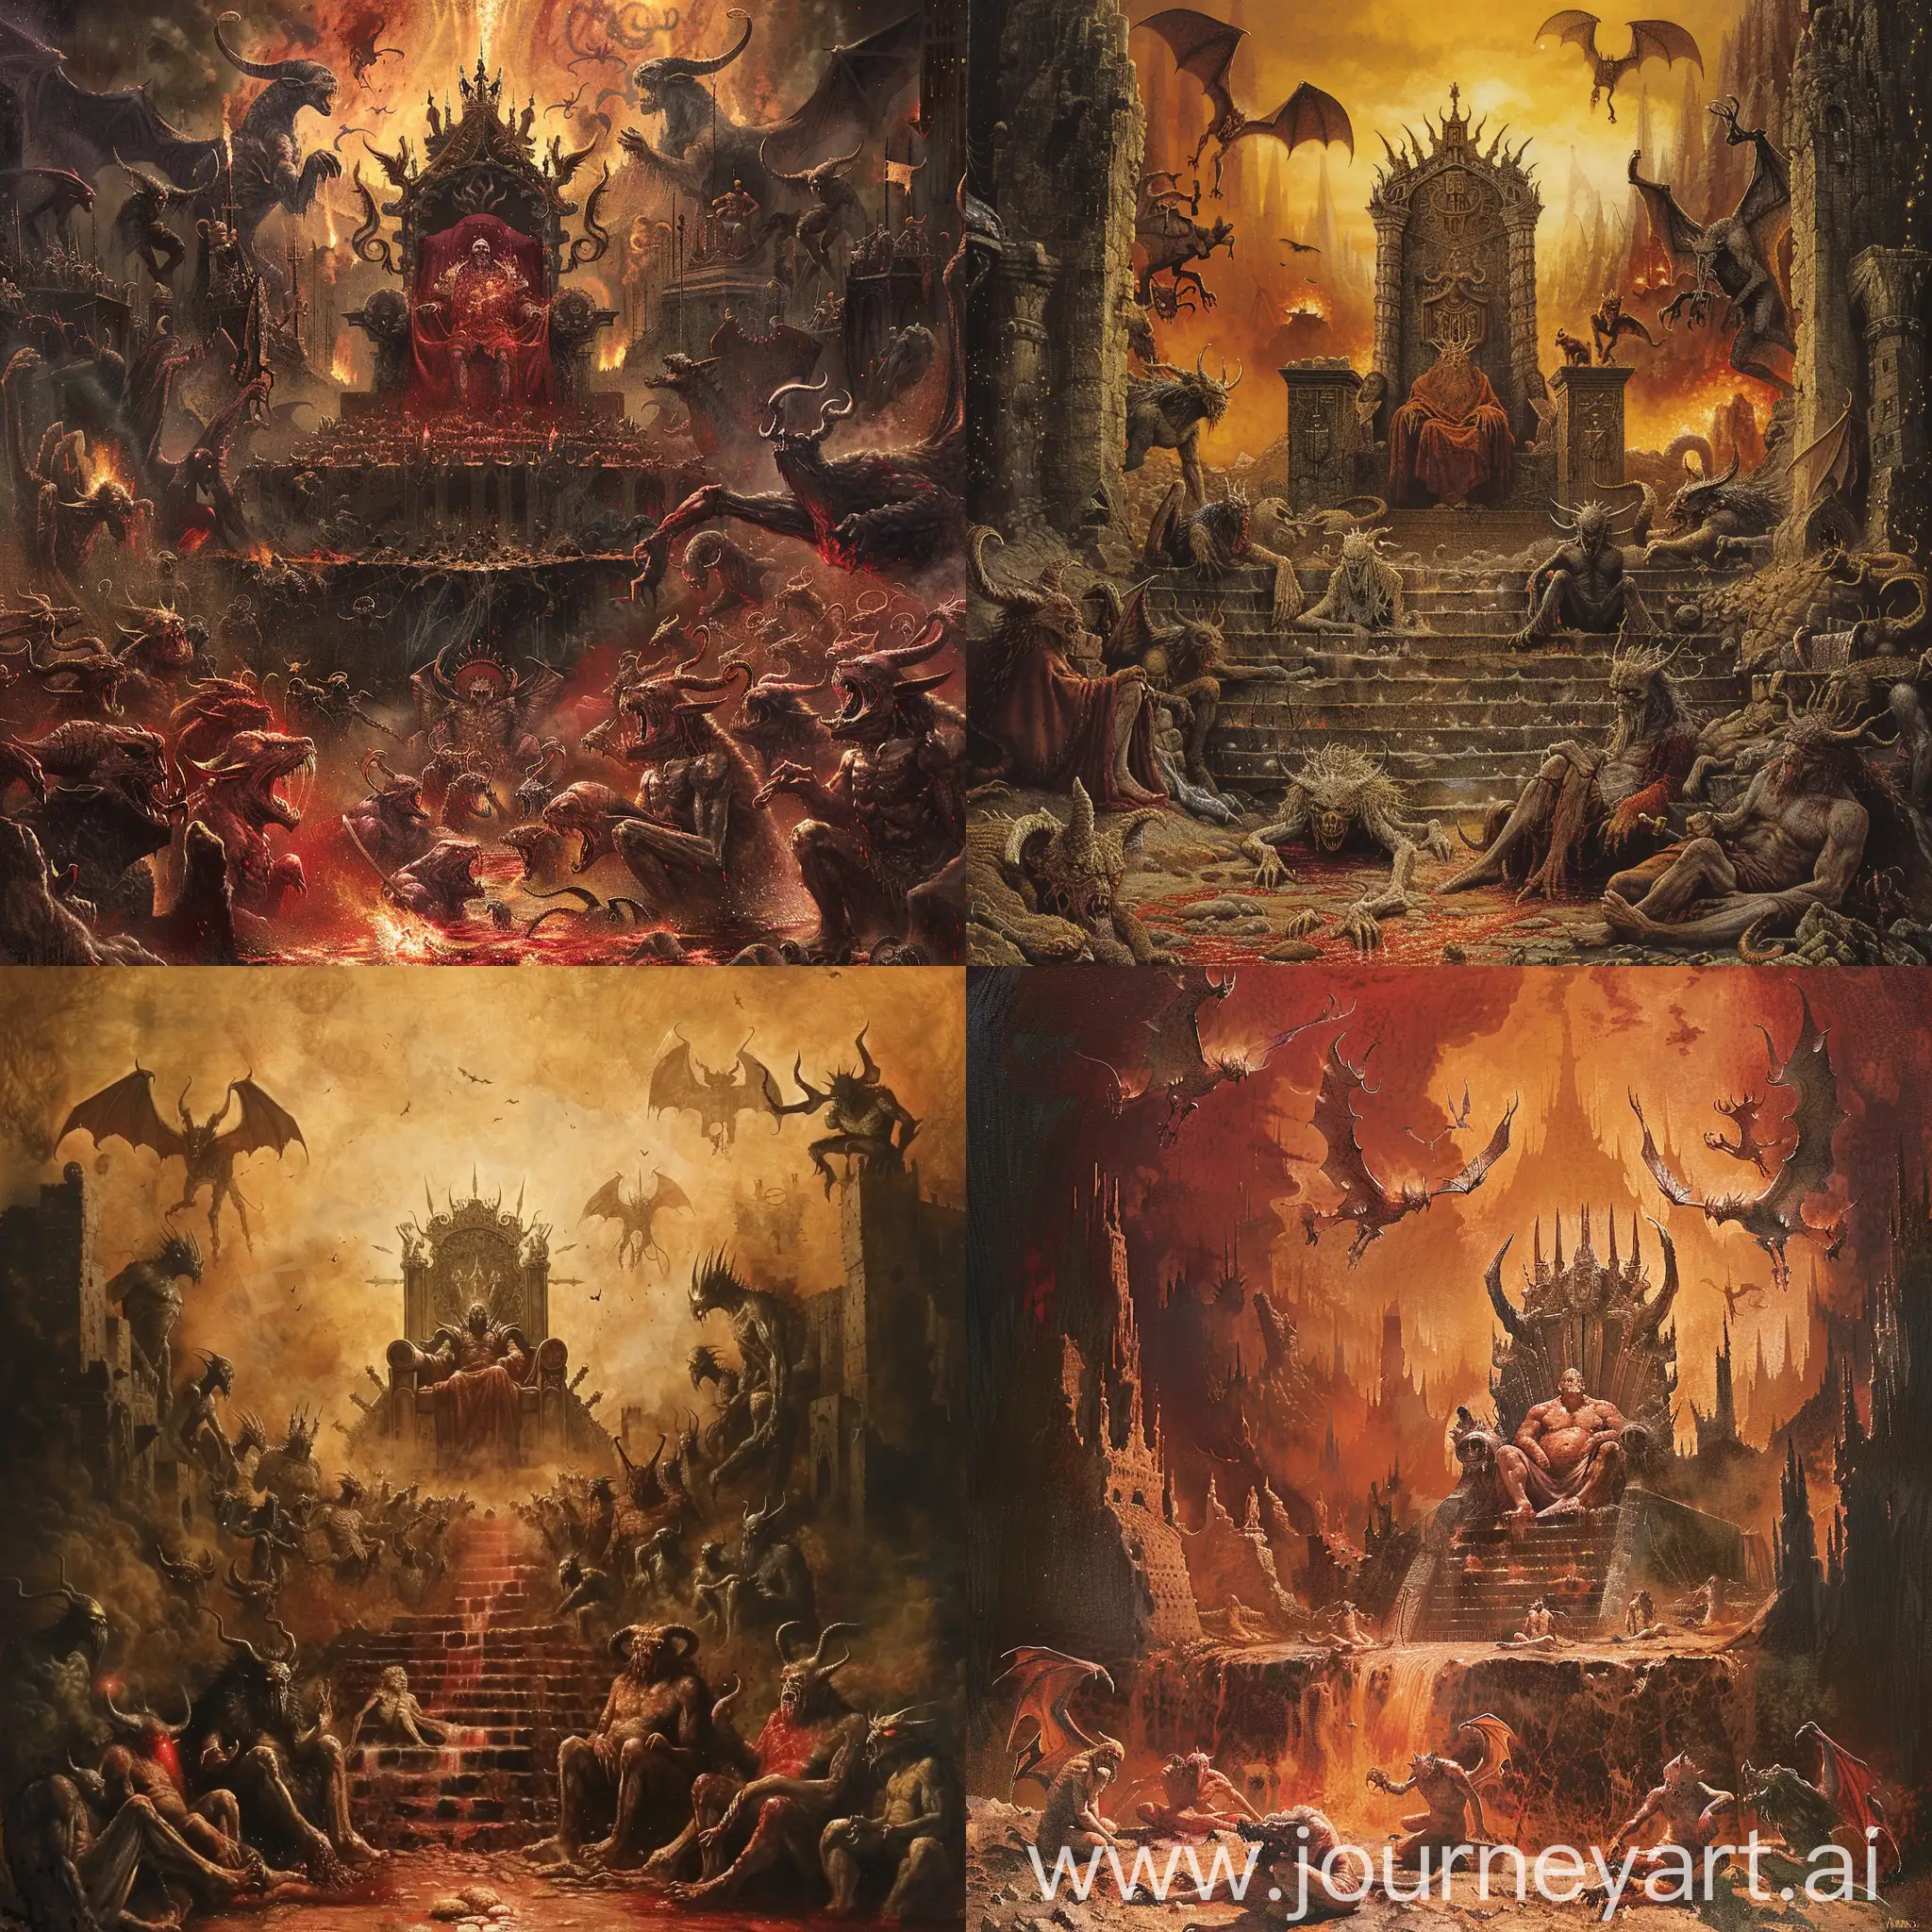 King-of-Hell-Surrounded-by-Lesser-Demons-in-Fiery-Kingdom